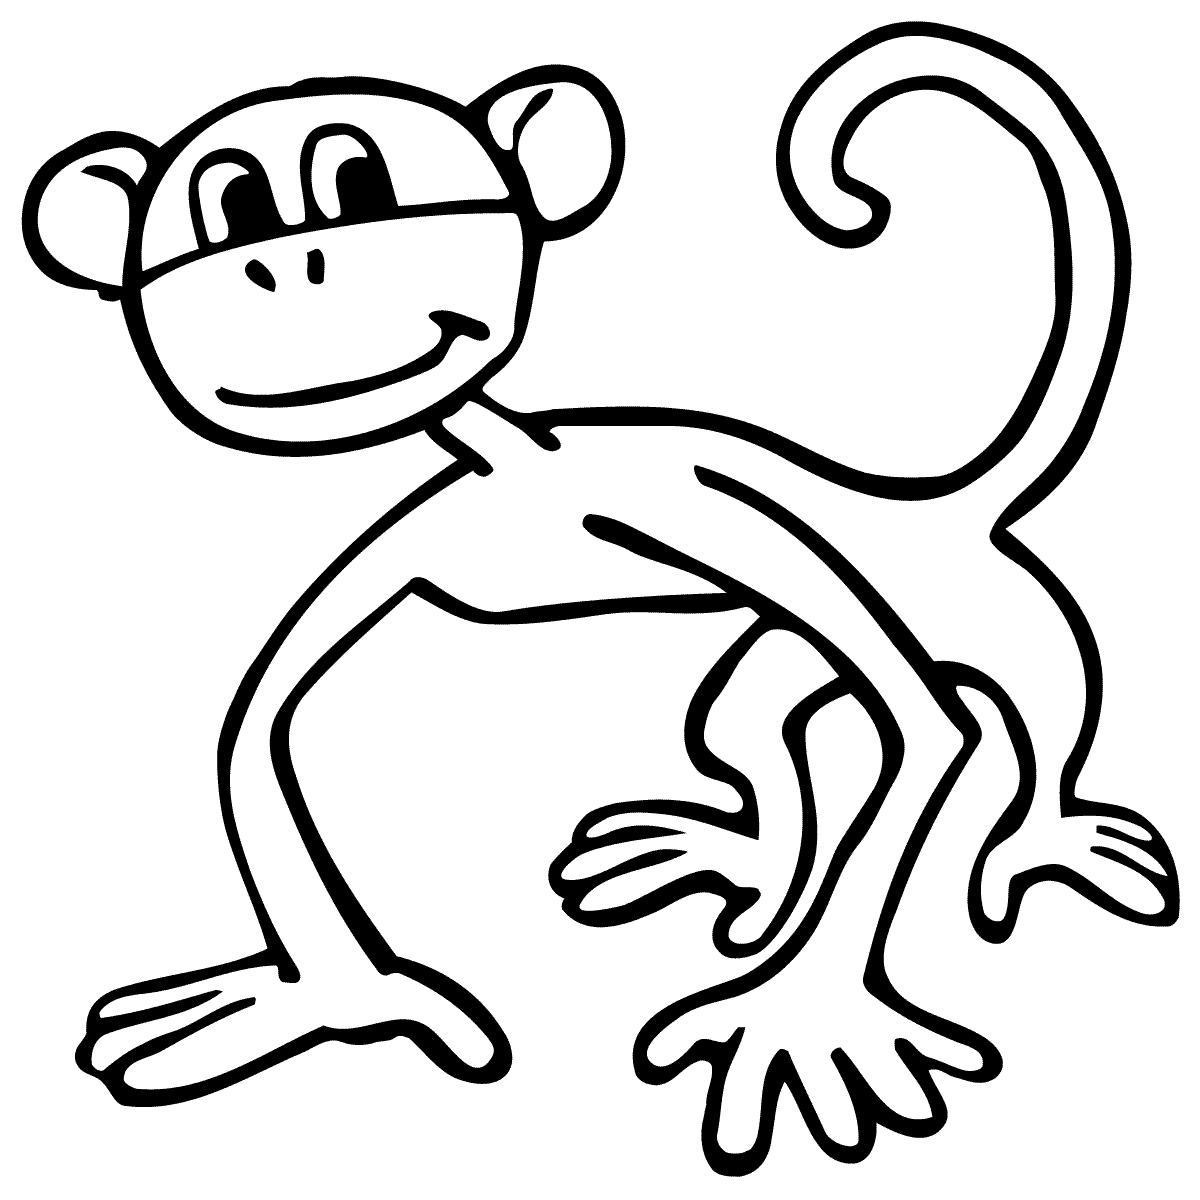 Best Photos of Monkey Outline Drawing - Black and White Monkey ...